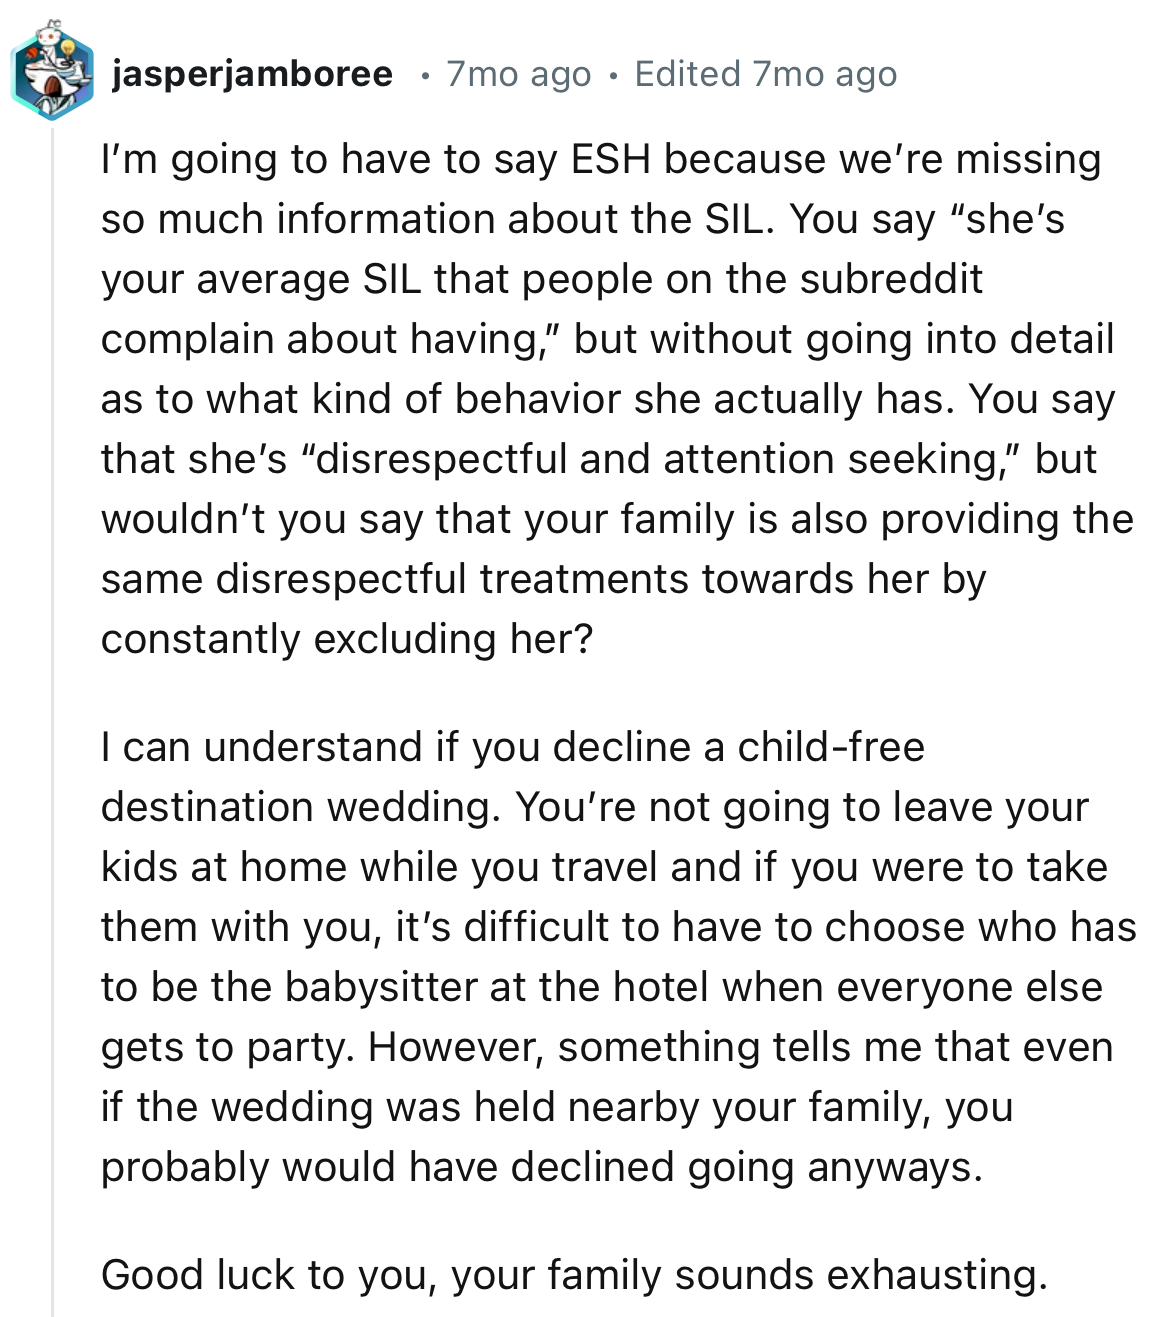 “Something tells me that even if the wedding was held near your family, you probably would have declined to go anyway.”